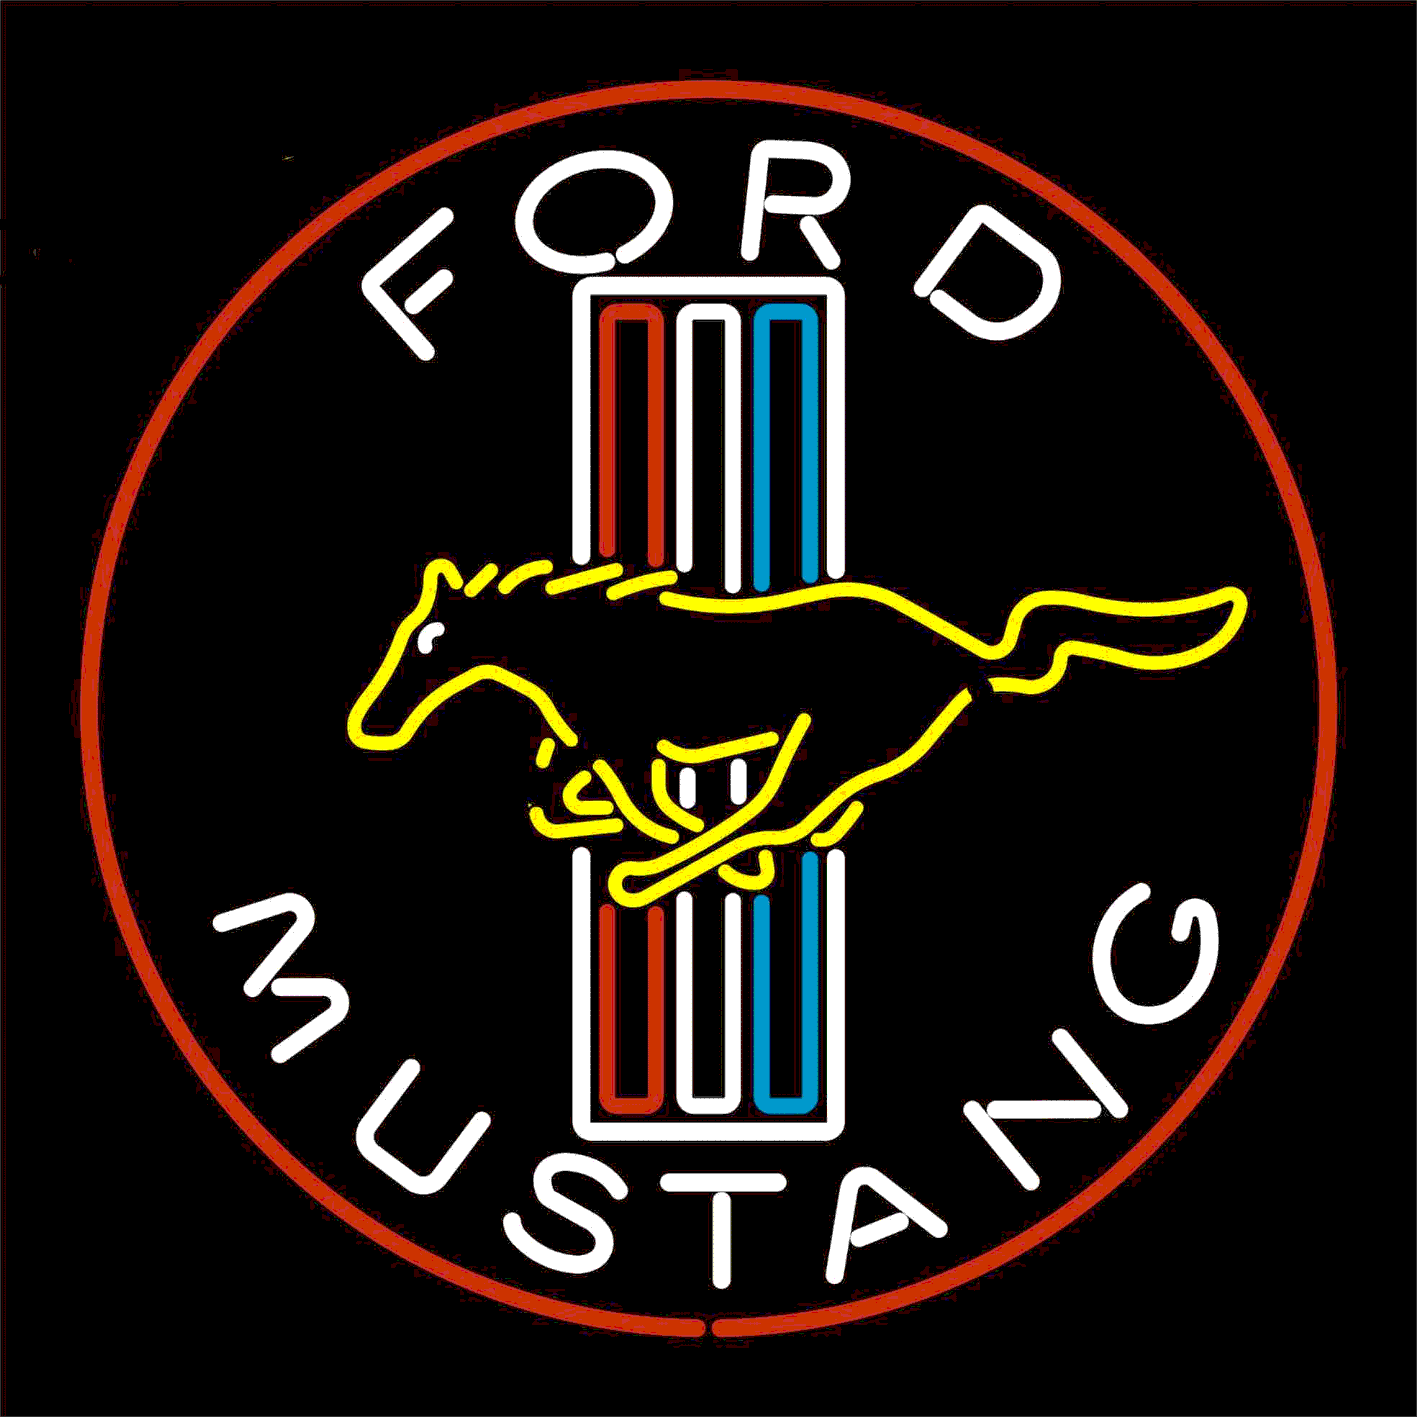 Cool Ford Logo - Free Ford Mustang Logo, Download Free Clip Art, Free Clip Art on ...